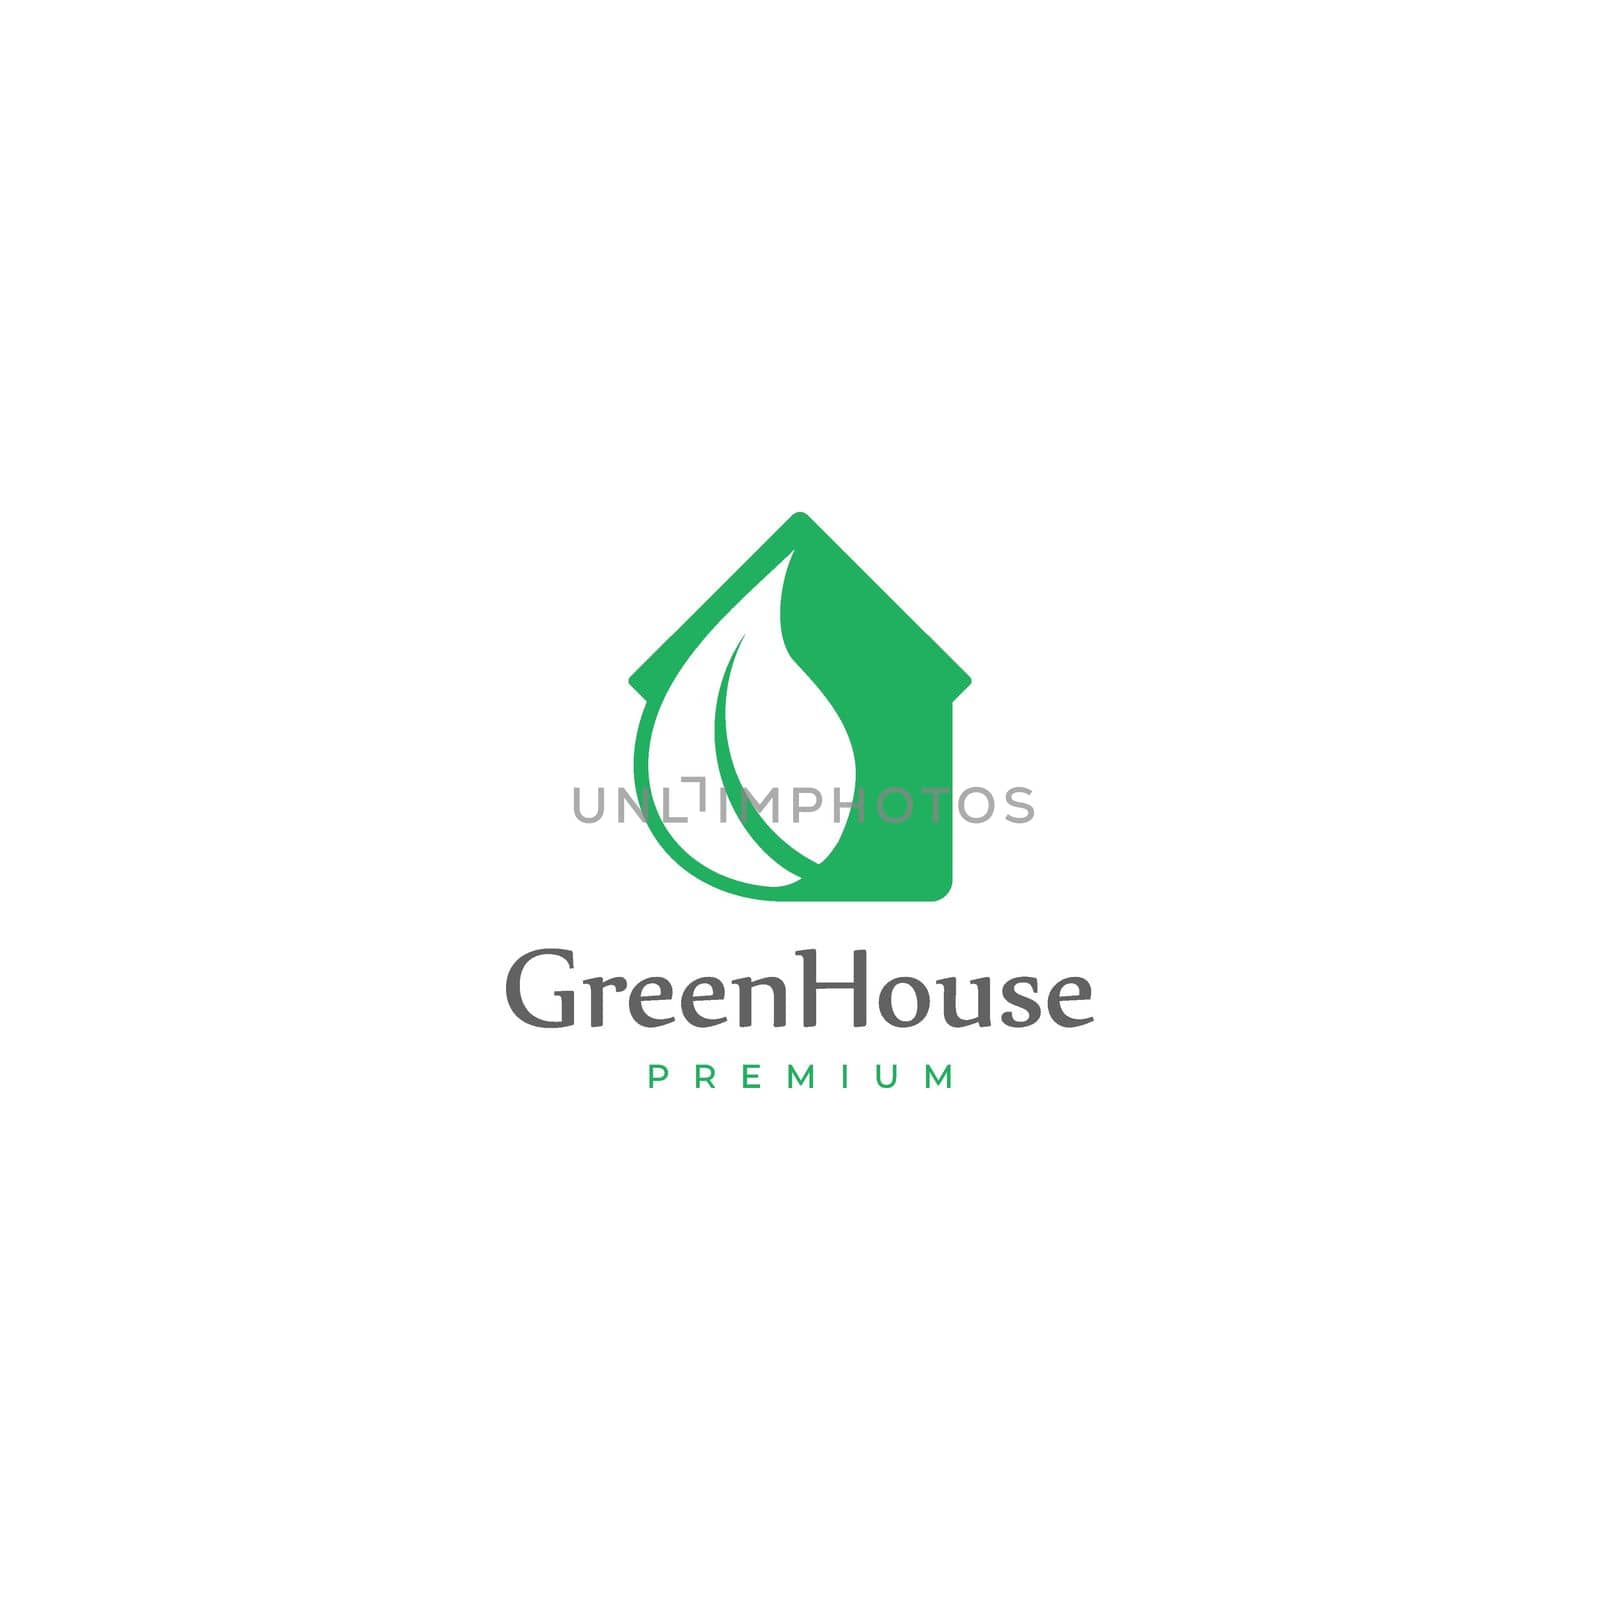 green house with leaf logo. healthy environment sign. organic home vector elements stock illustration.